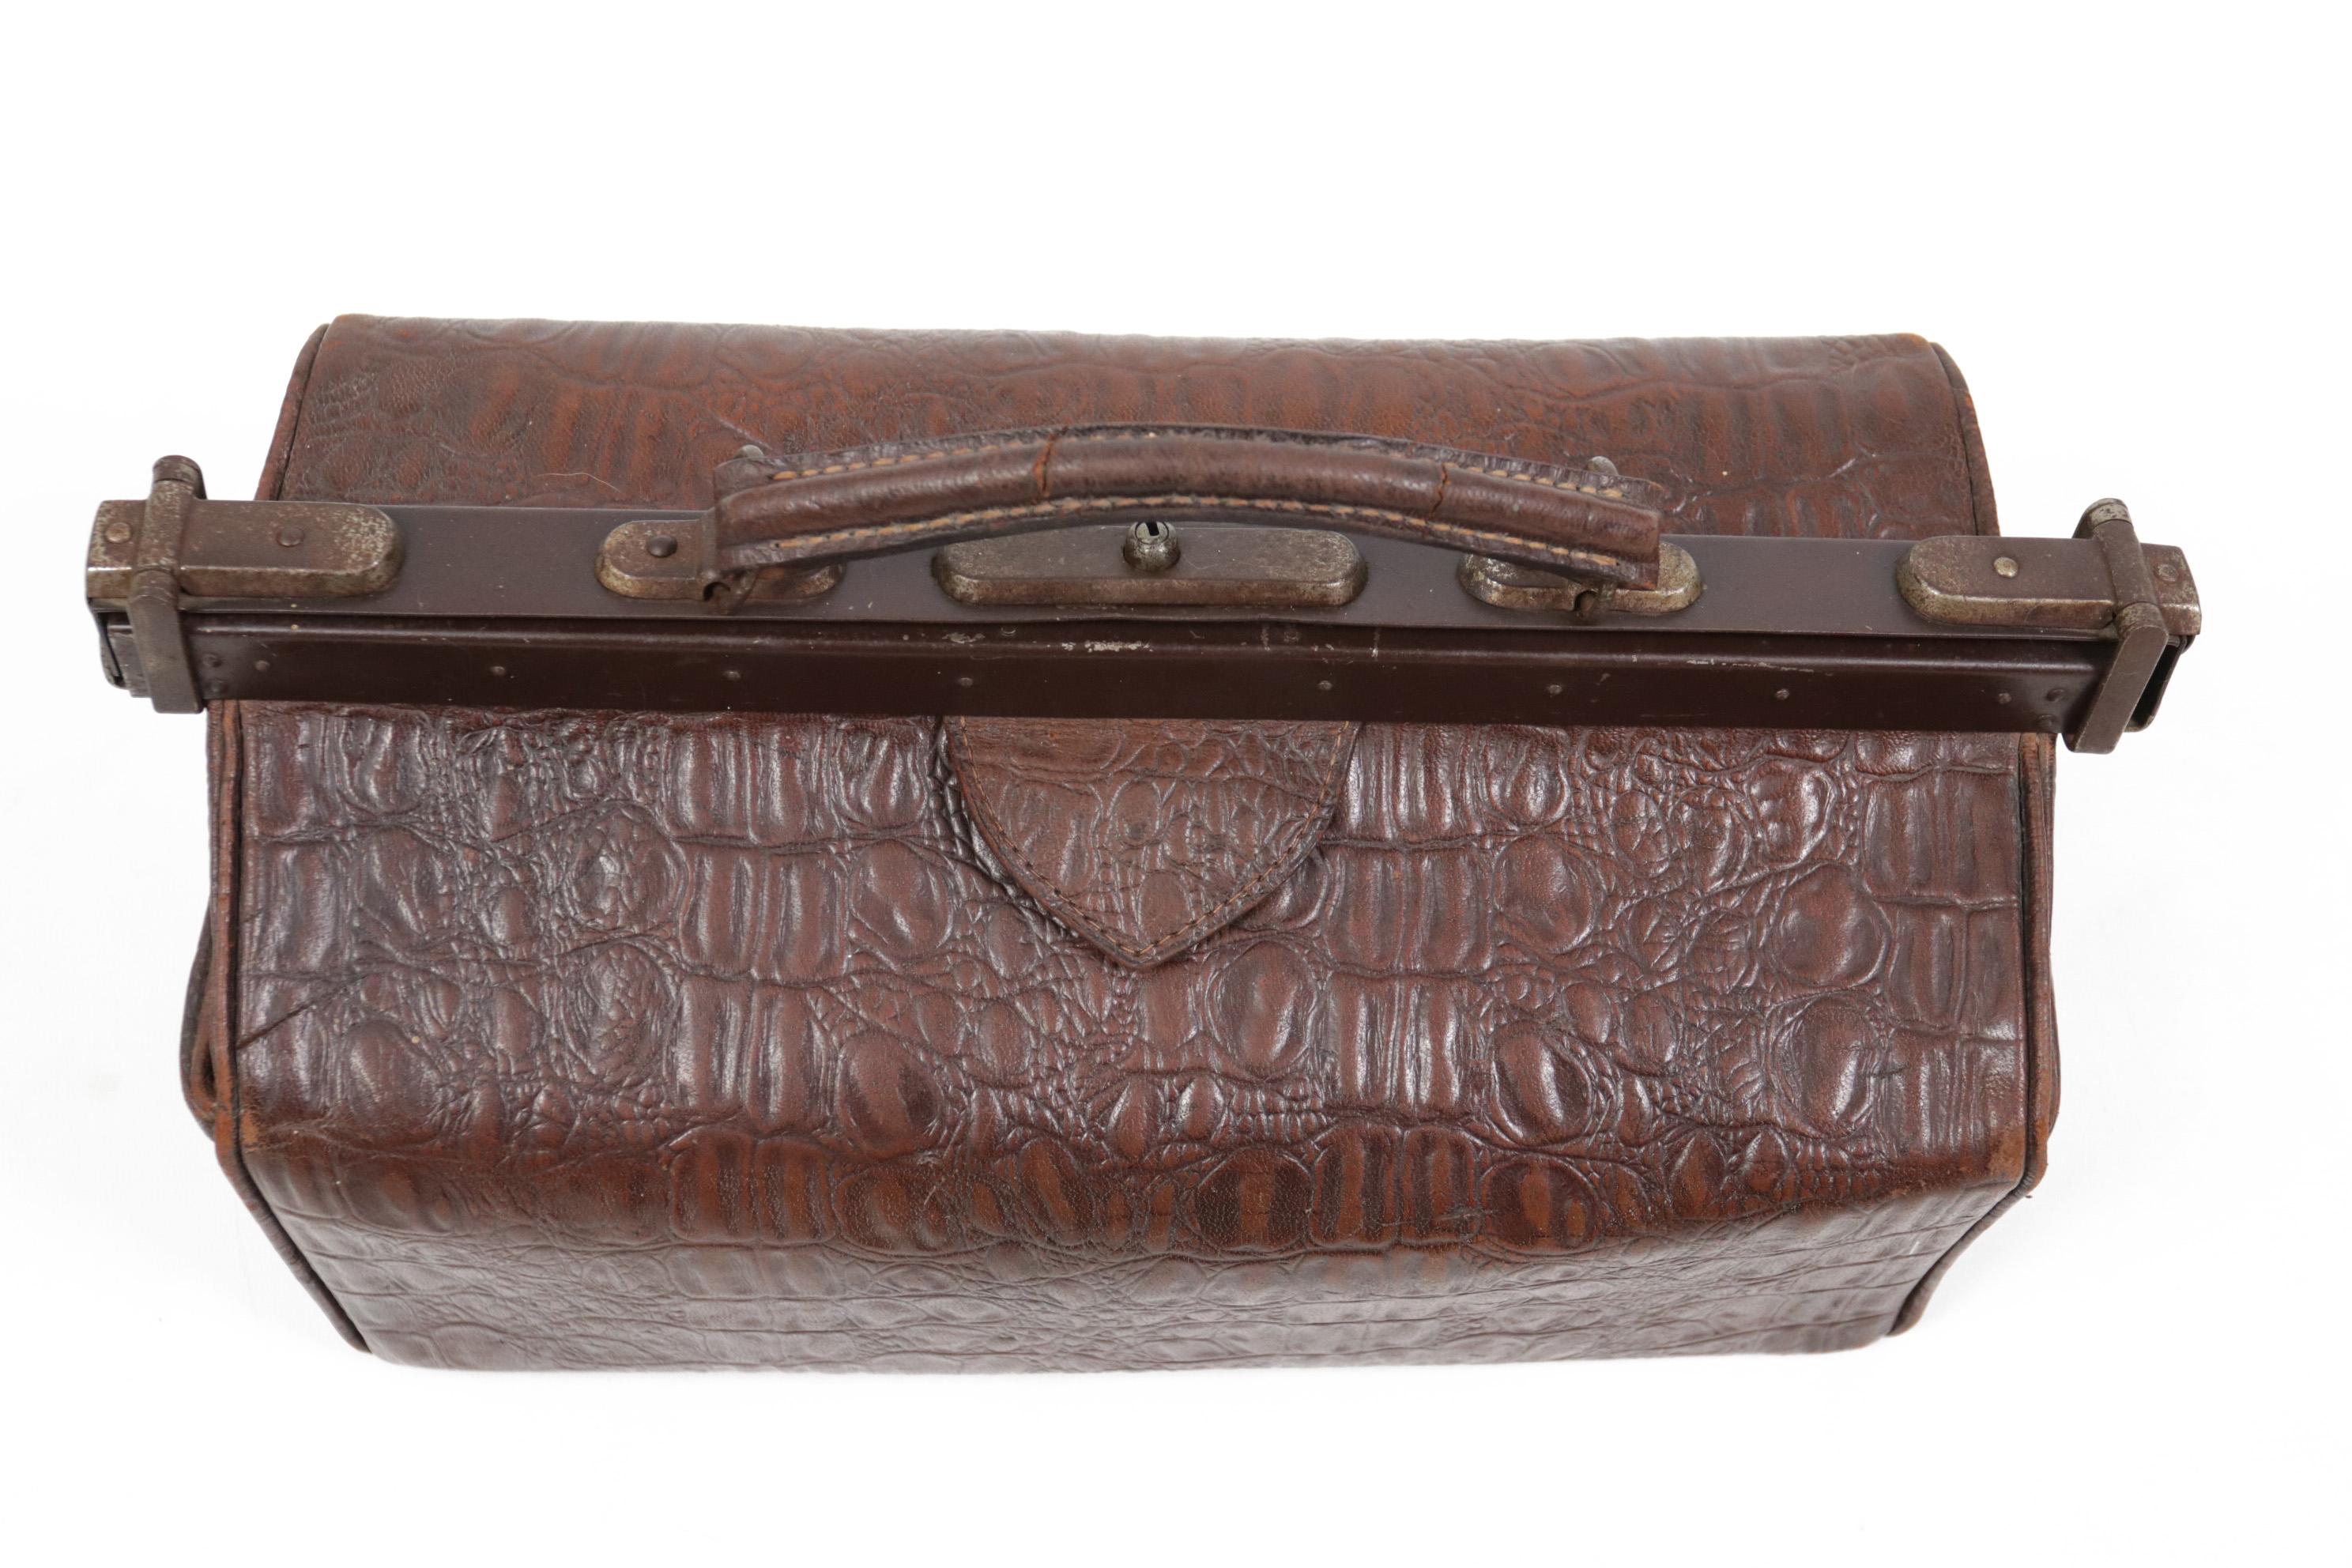 Art Deco French Embossed Crocodile Leather Doctor’s Bag, c. 1920